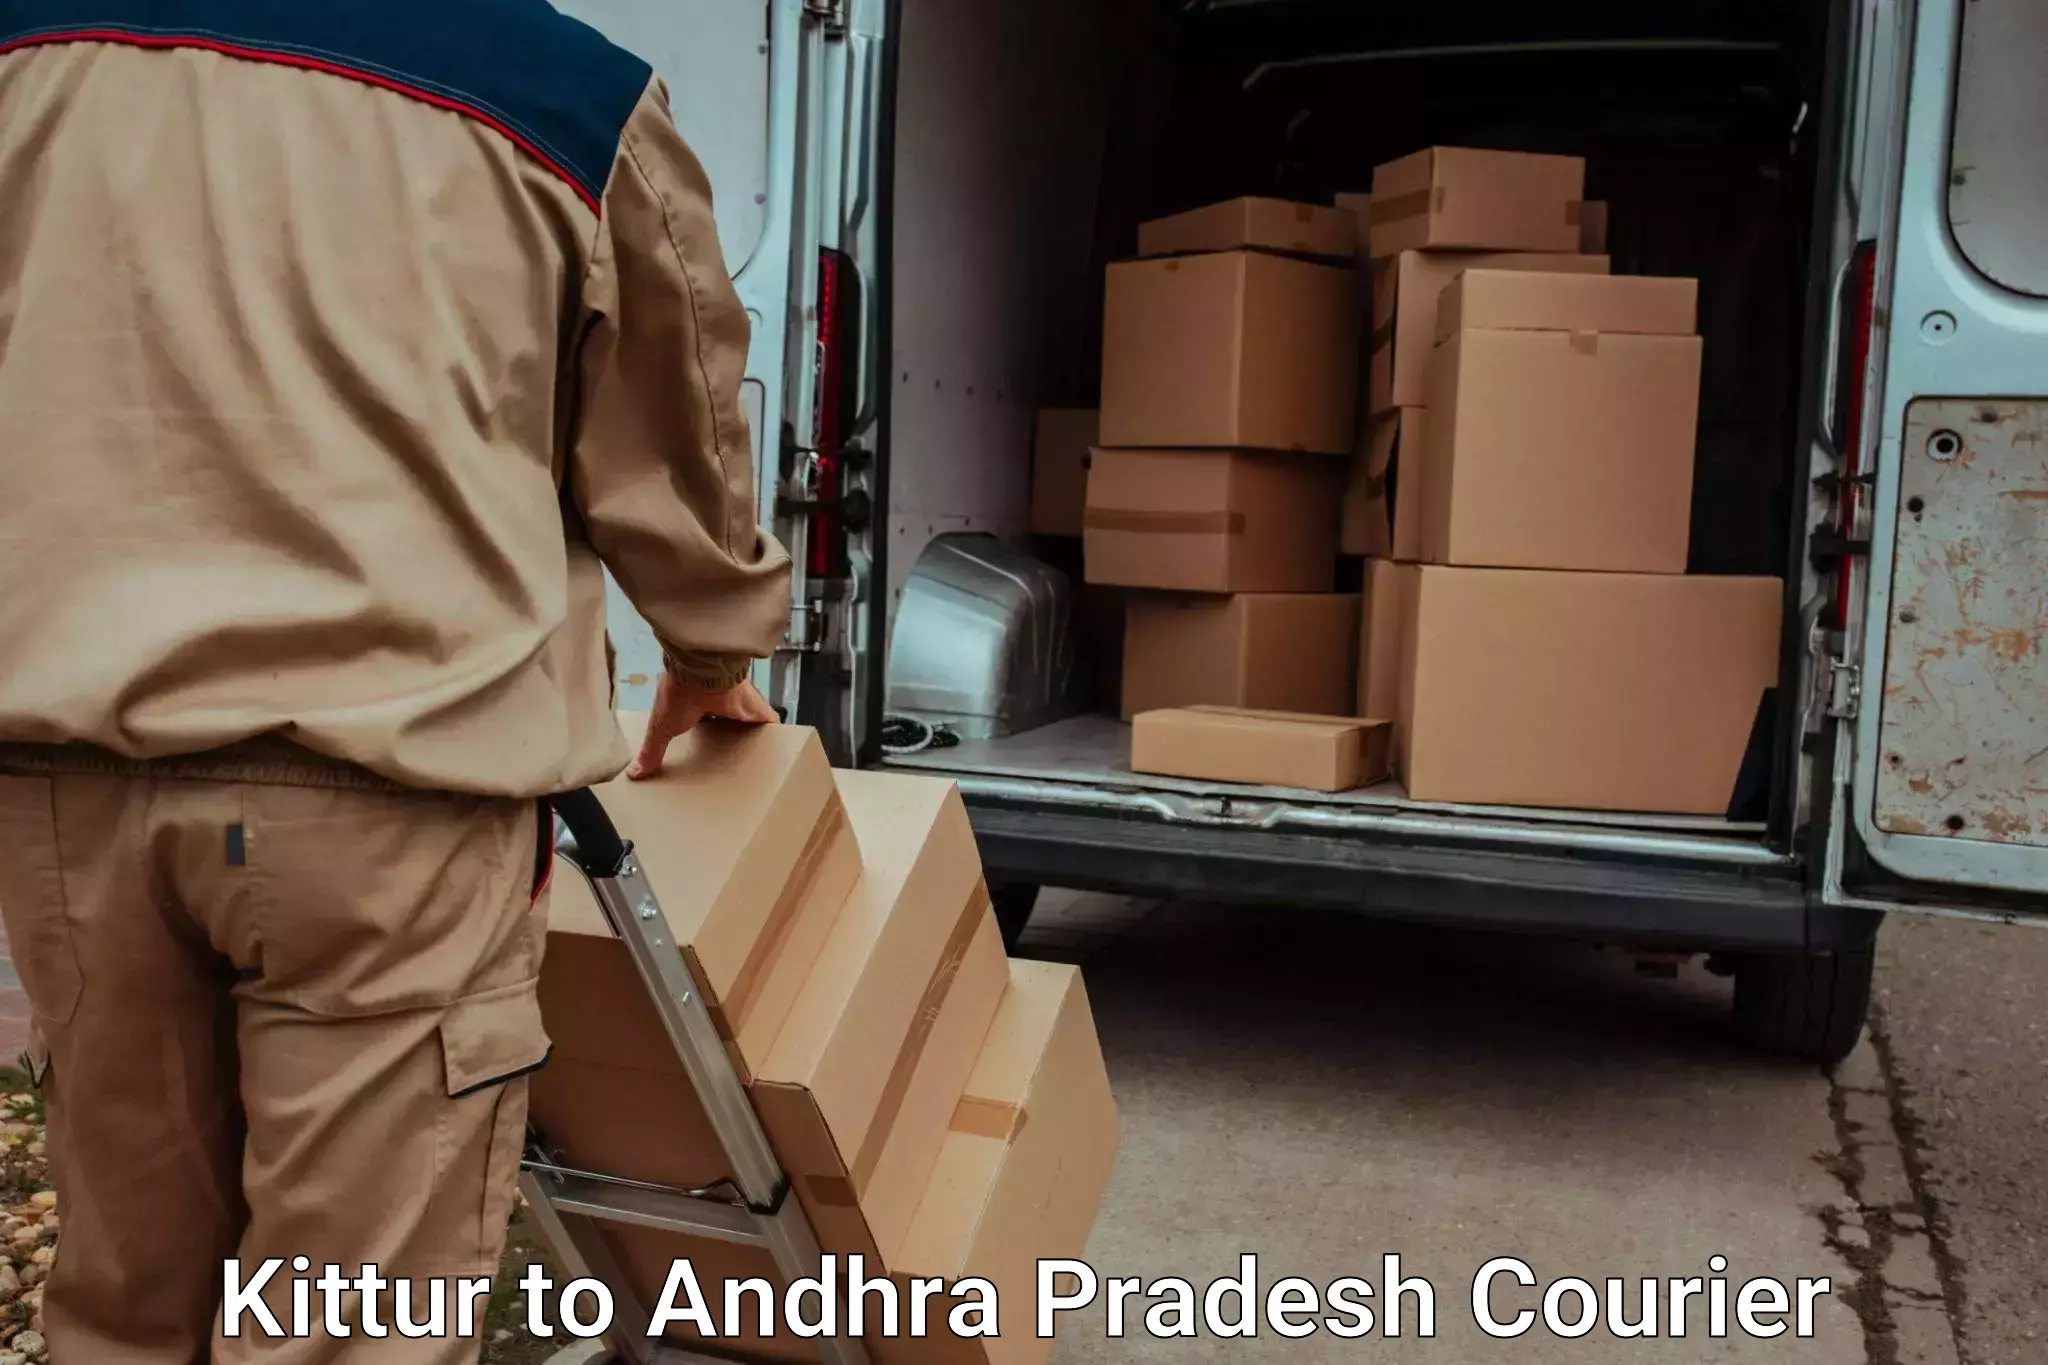 Quality relocation assistance Kittur to Bhattiprolu